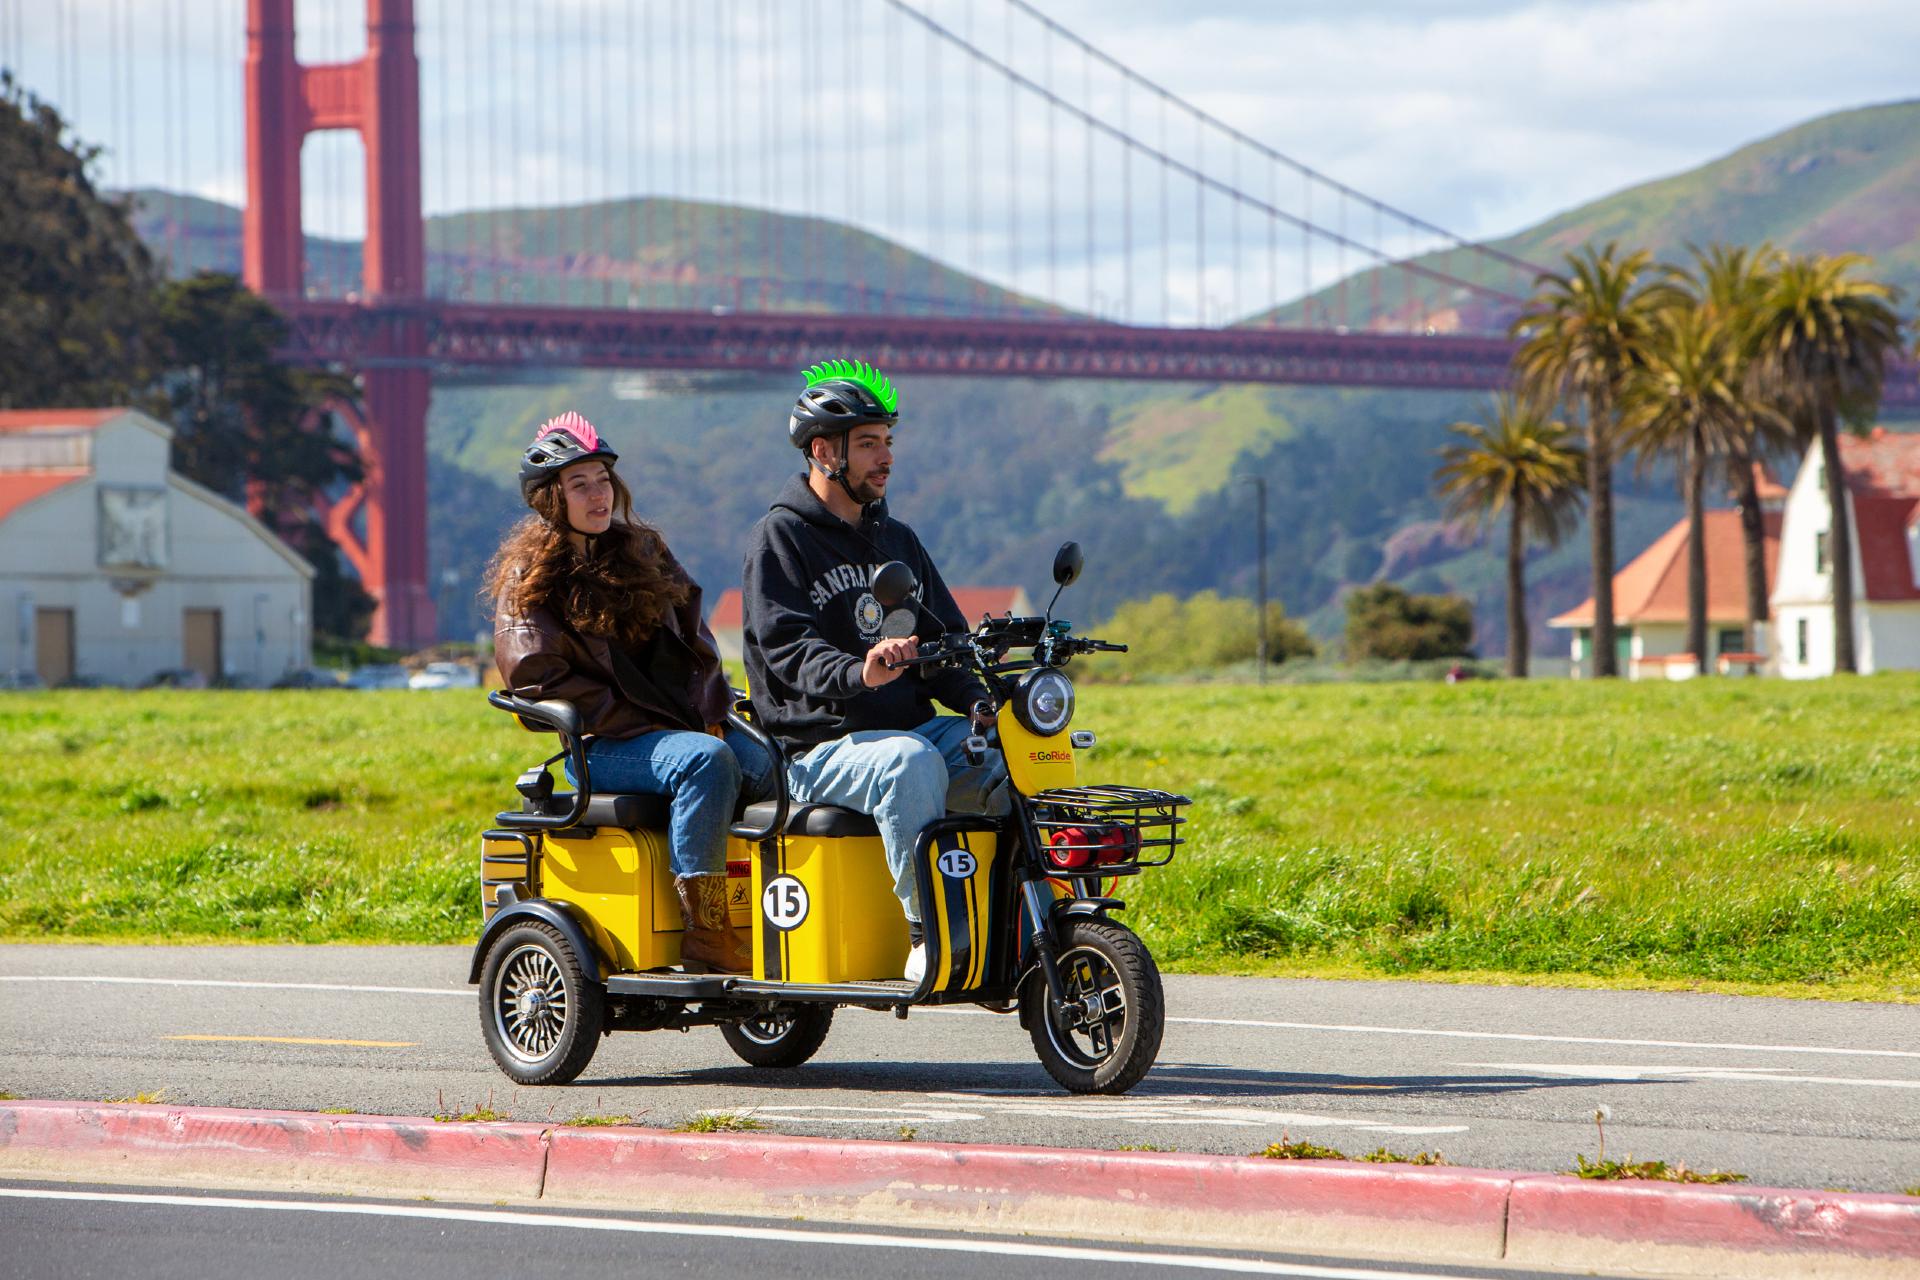 Electric Scooter Rentals with GPS Storytelling Tour to the Golden Gate